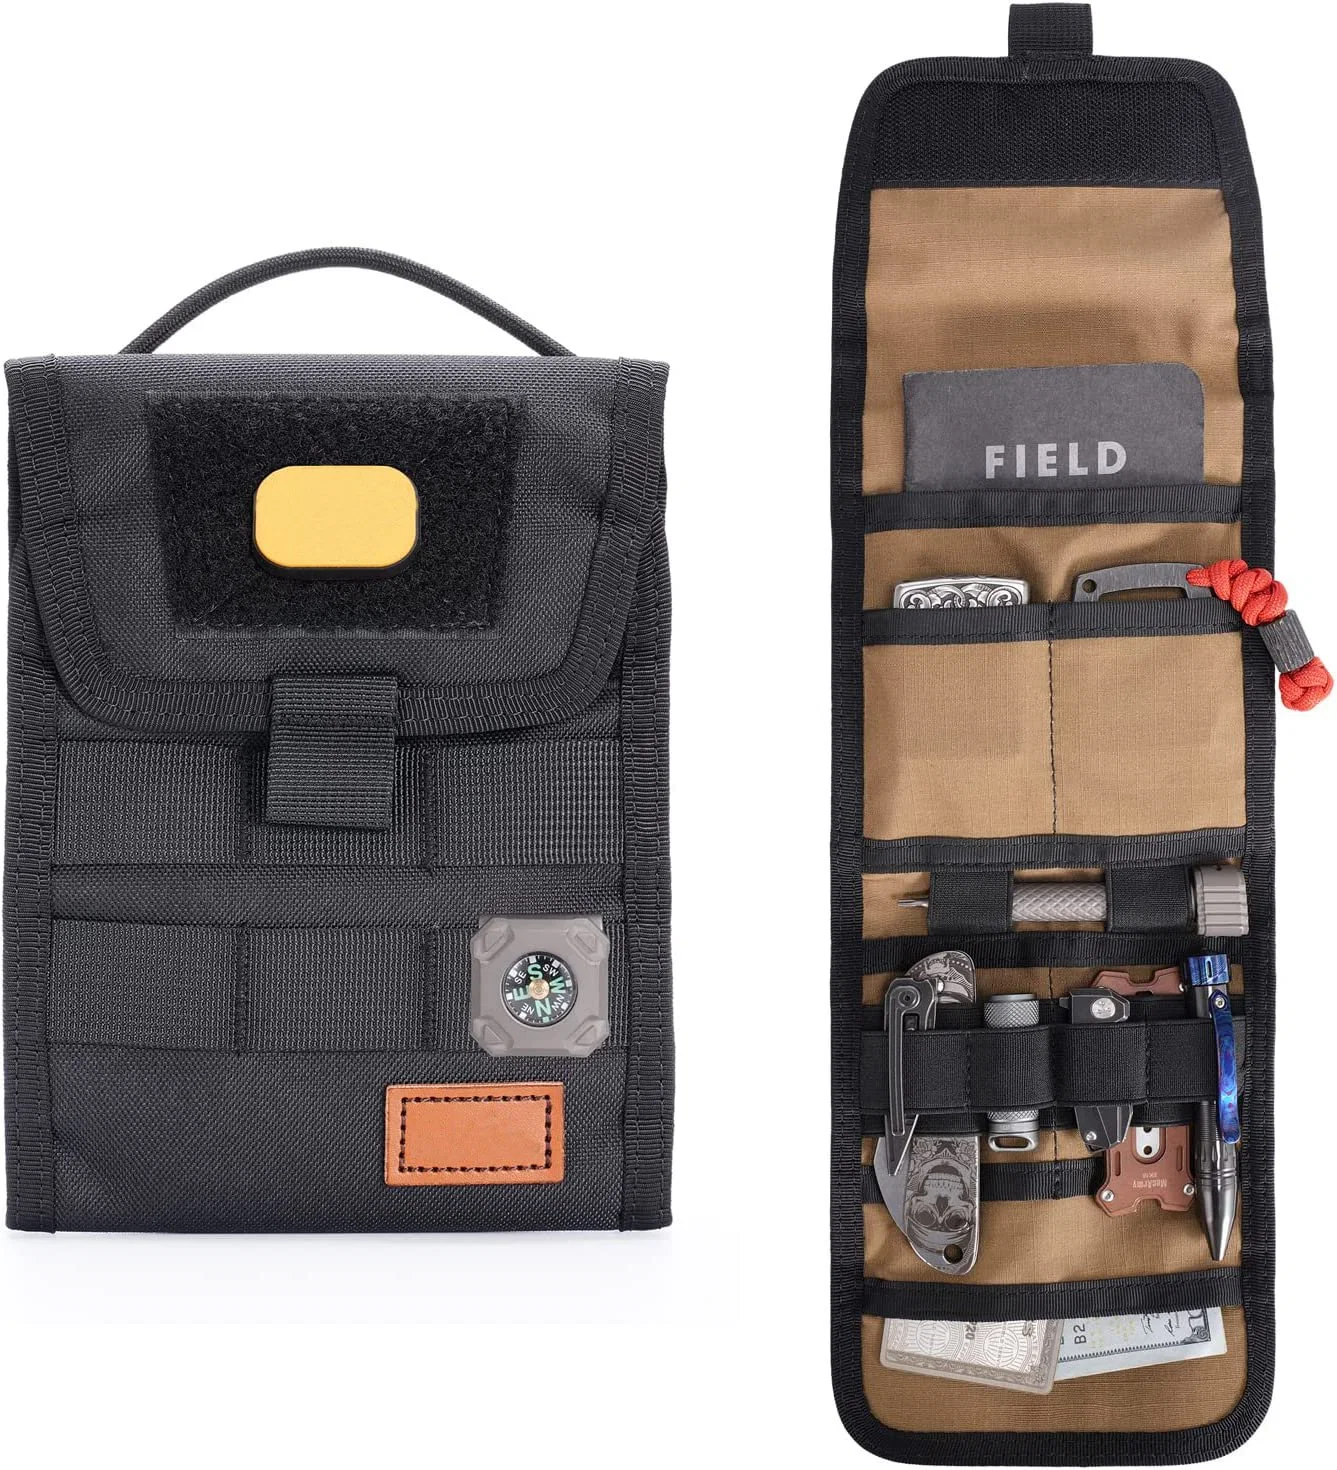 Utility EDC Pocket Organizer Bag for Outdoor and Daily Used